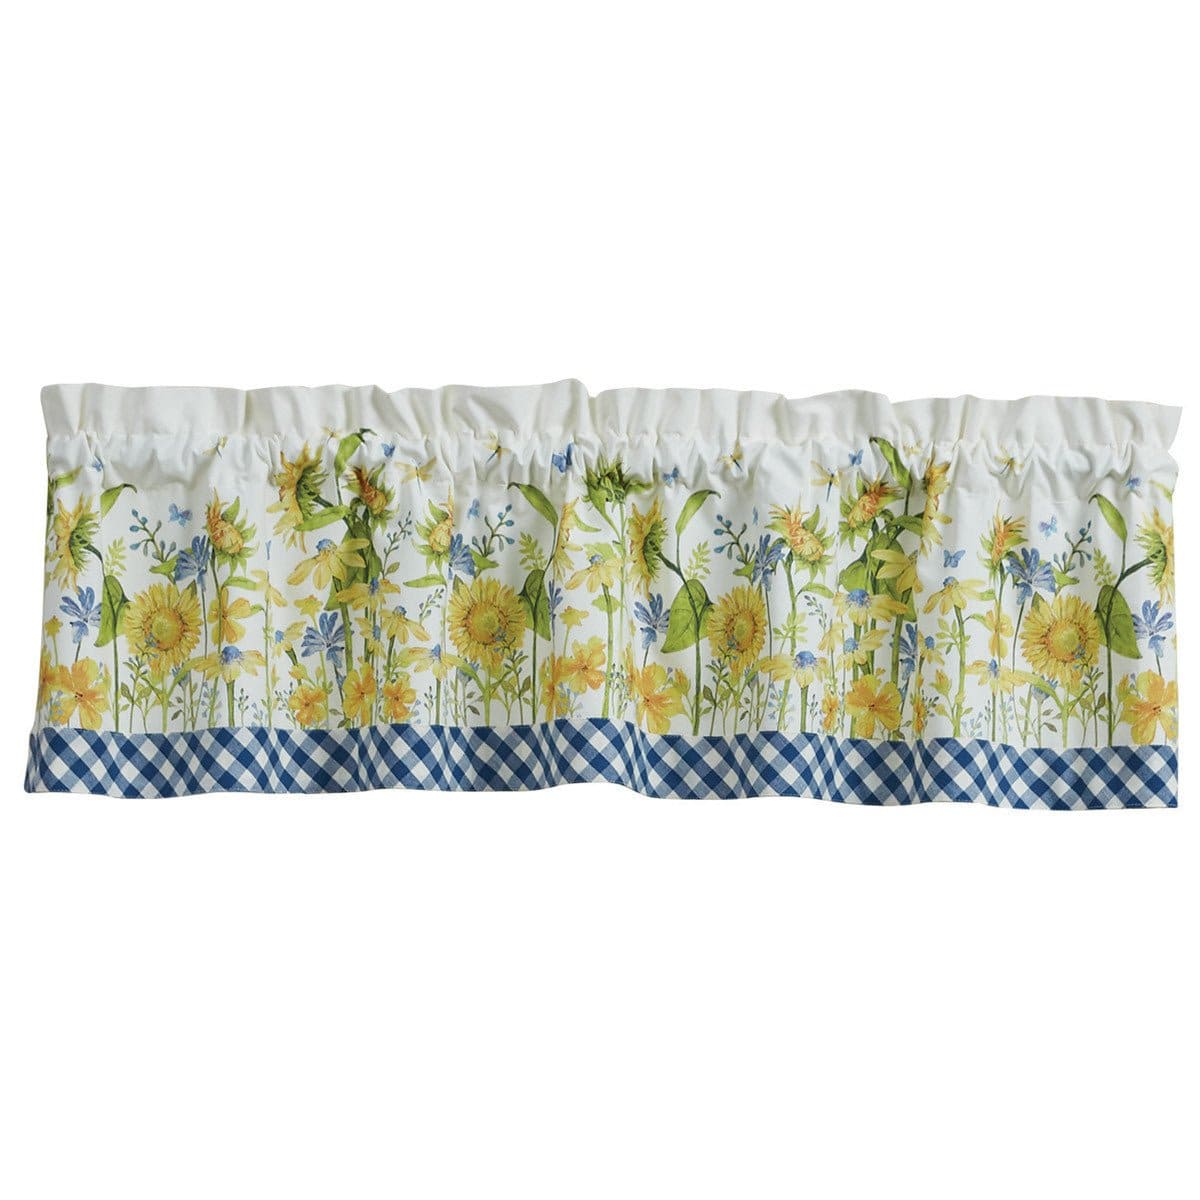 Sunny Day Printed Valance Unlined-Park Designs-The Village Merchant